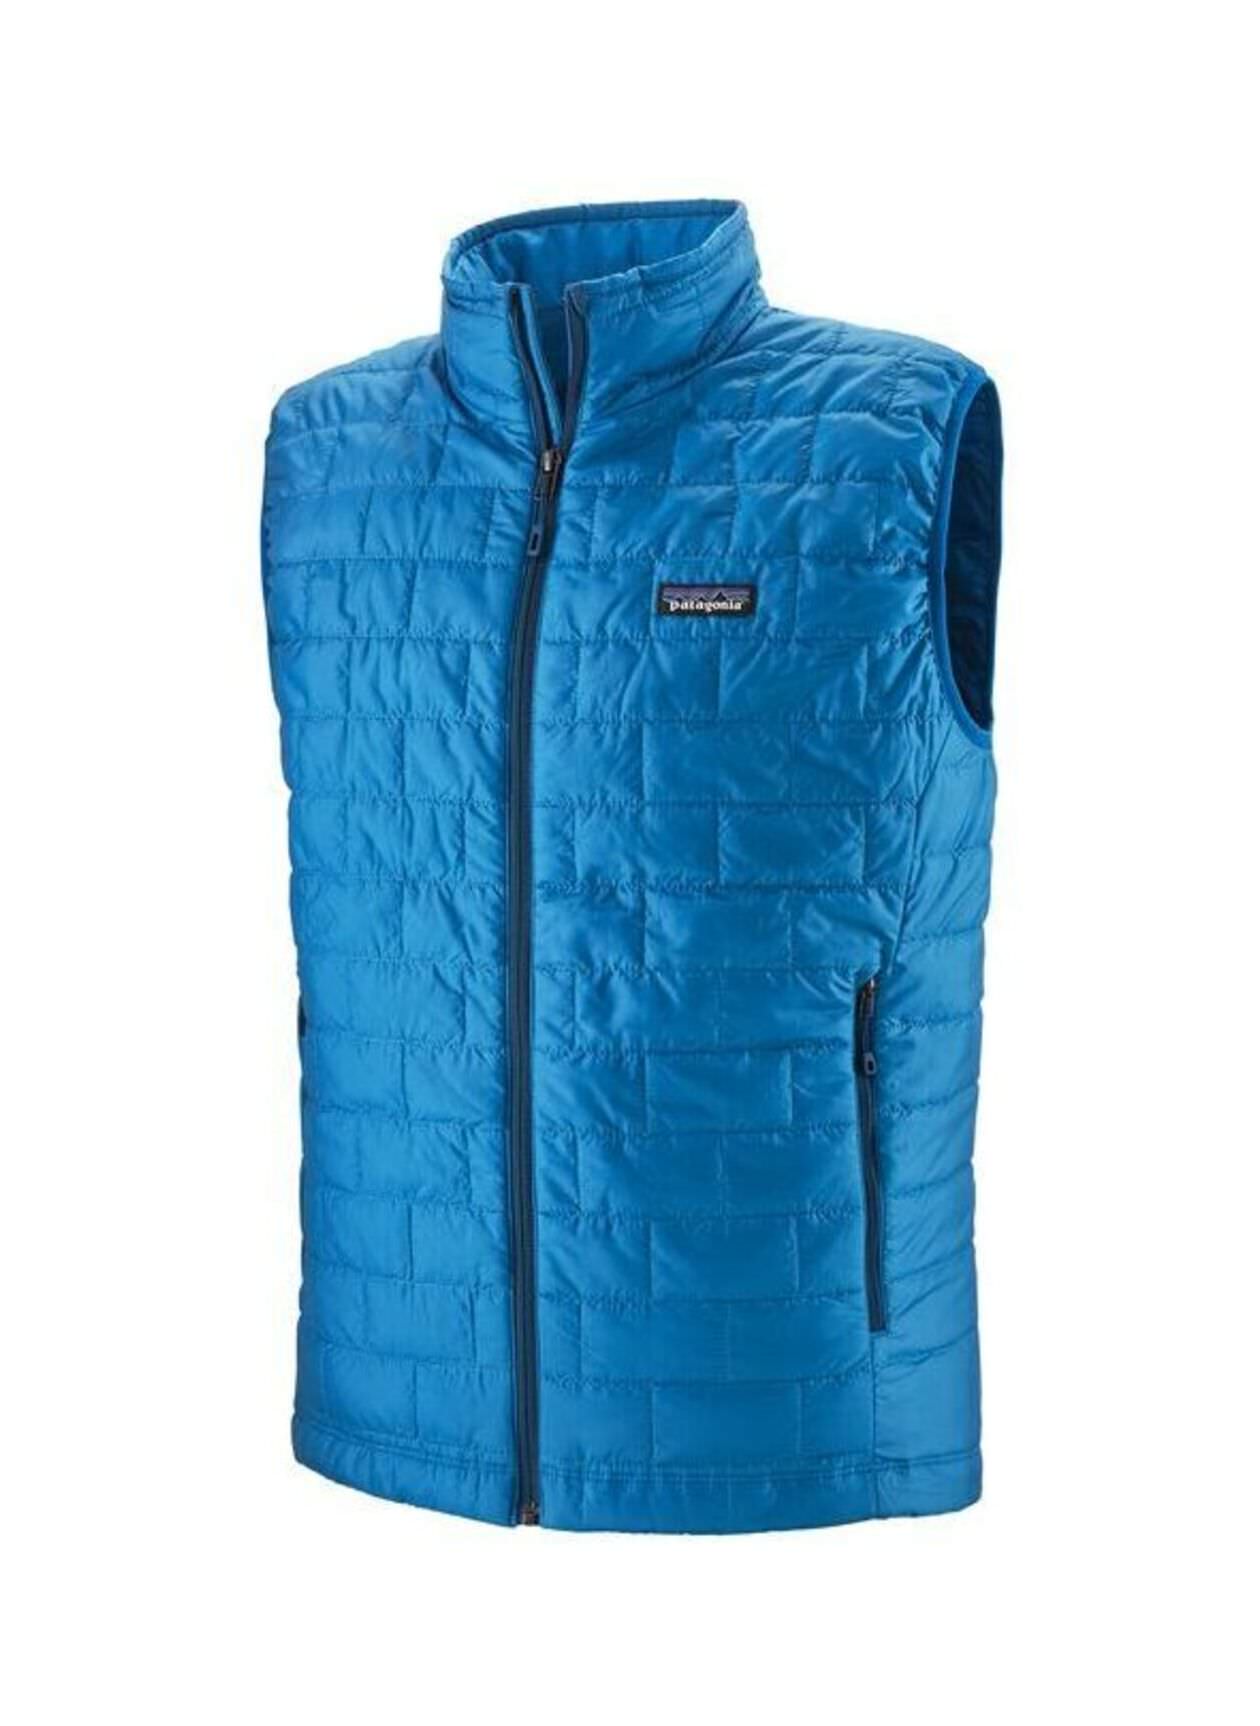 Patagonia Men's Andes Blue-Andes Blue Nano Puff Vest | Custom ...